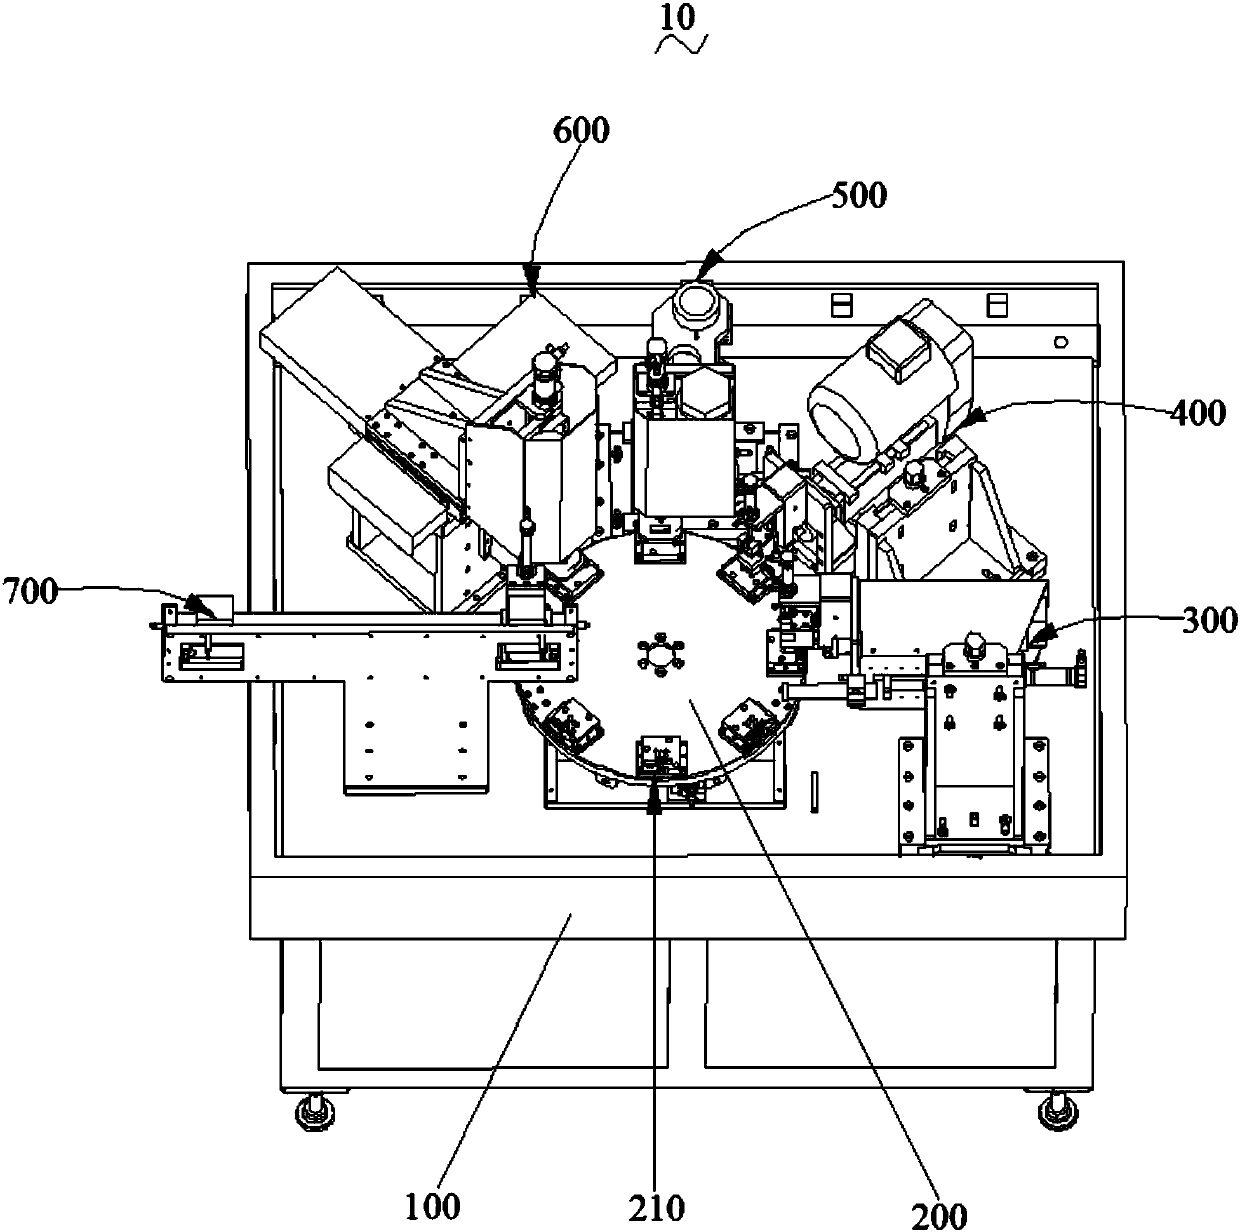 Battery carbon rod feeding mechanism and battery assembling facility